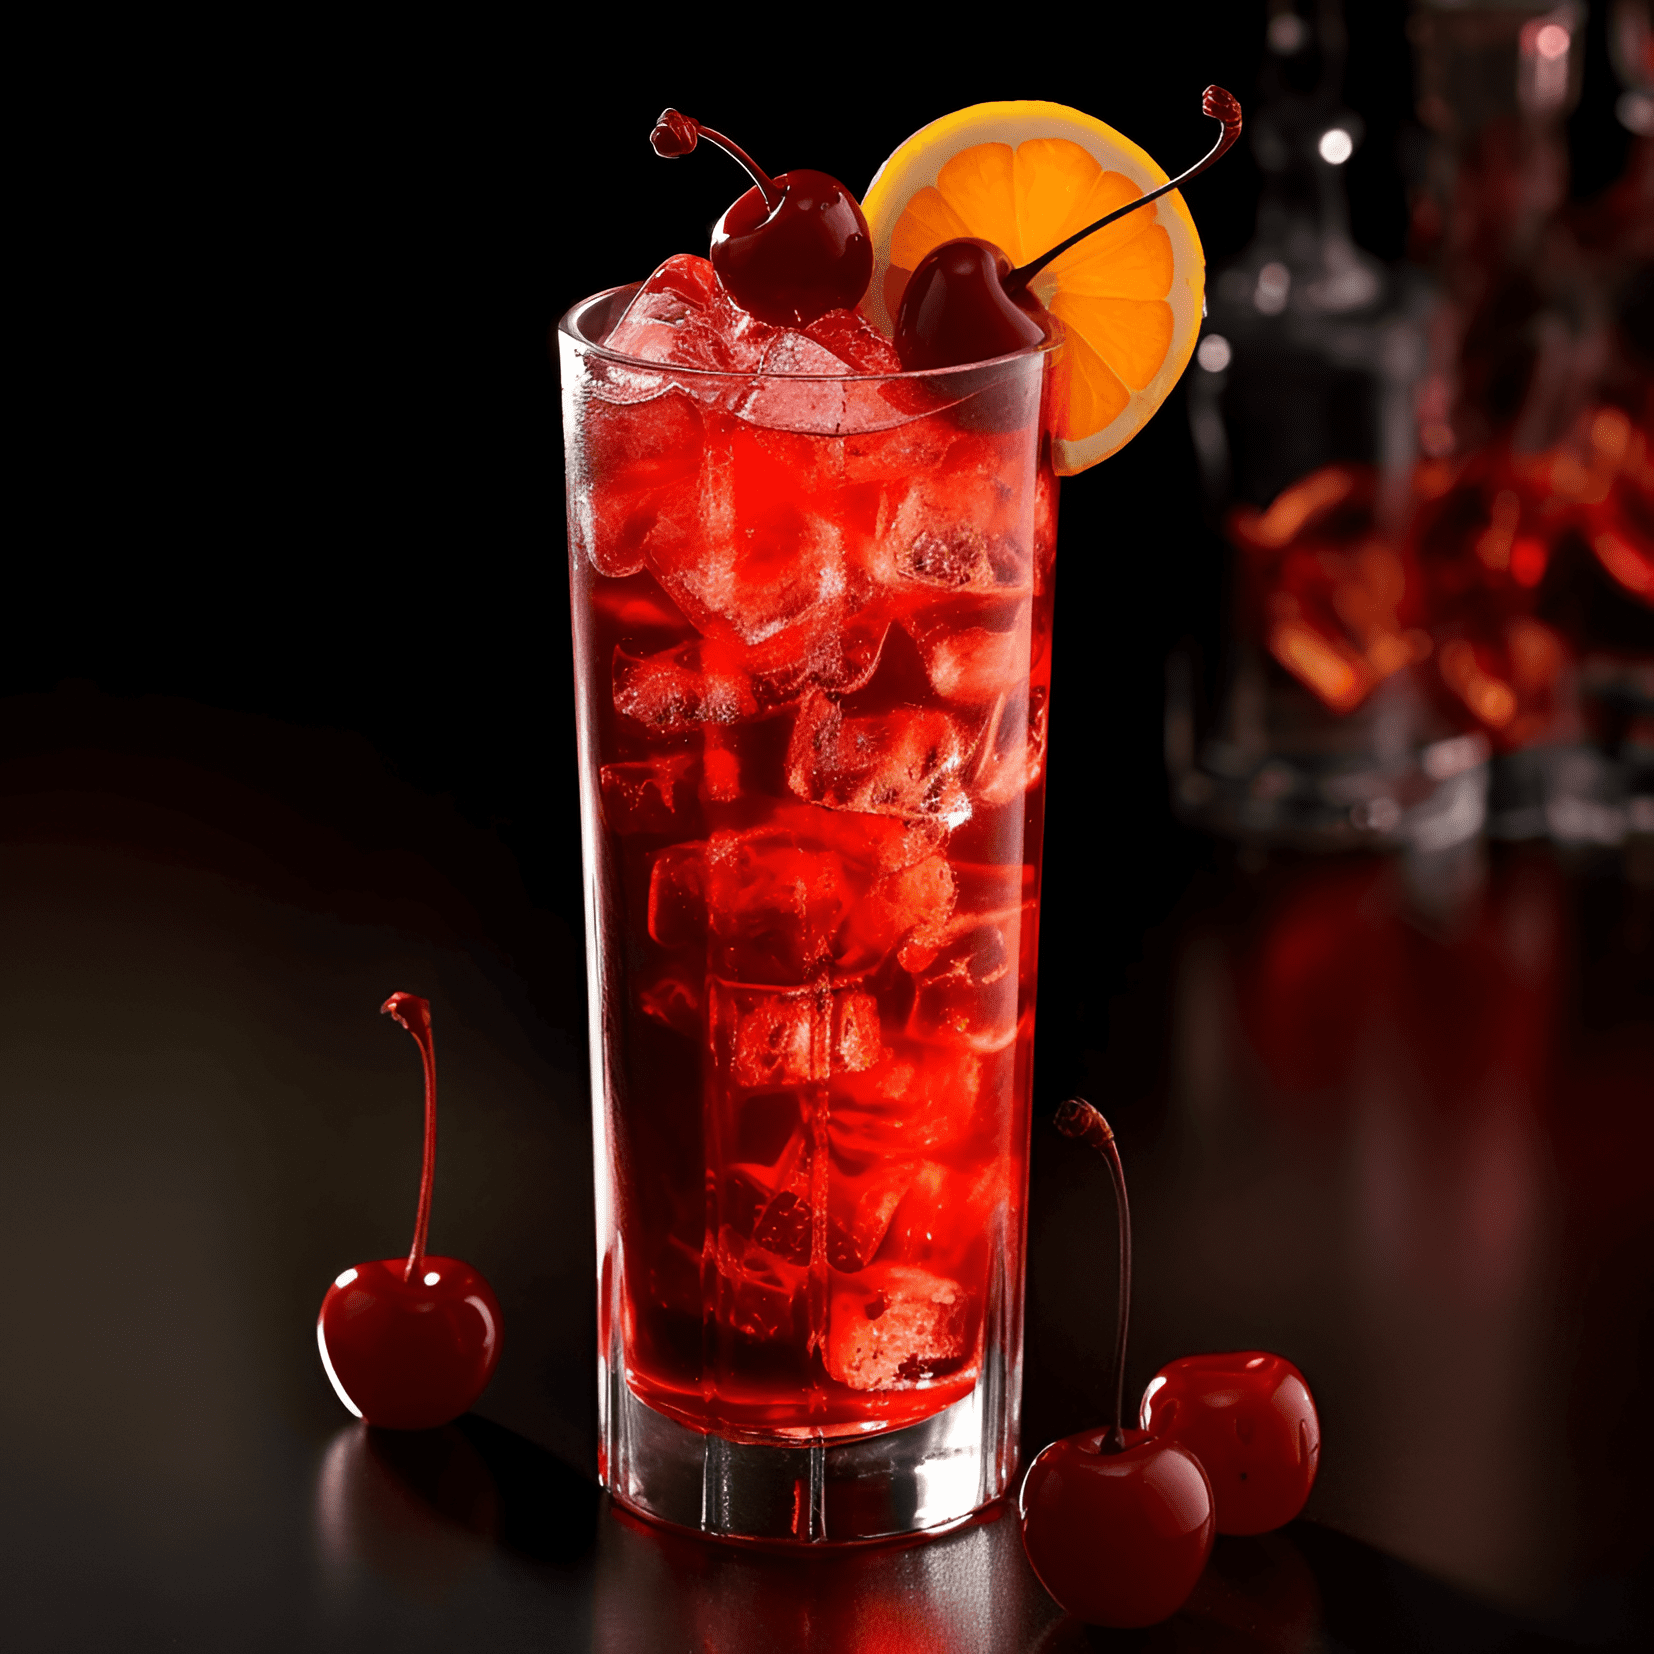 Red Death Cocktail Recipe - The Red Death cocktail is a fruity and sweet concoction, with a hint of sourness from the lemon juice. It has a smooth and refreshing taste, making it easy to drink and enjoy. The combination of different fruit flavors creates a unique and delicious taste that is both satisfying and invigorating.